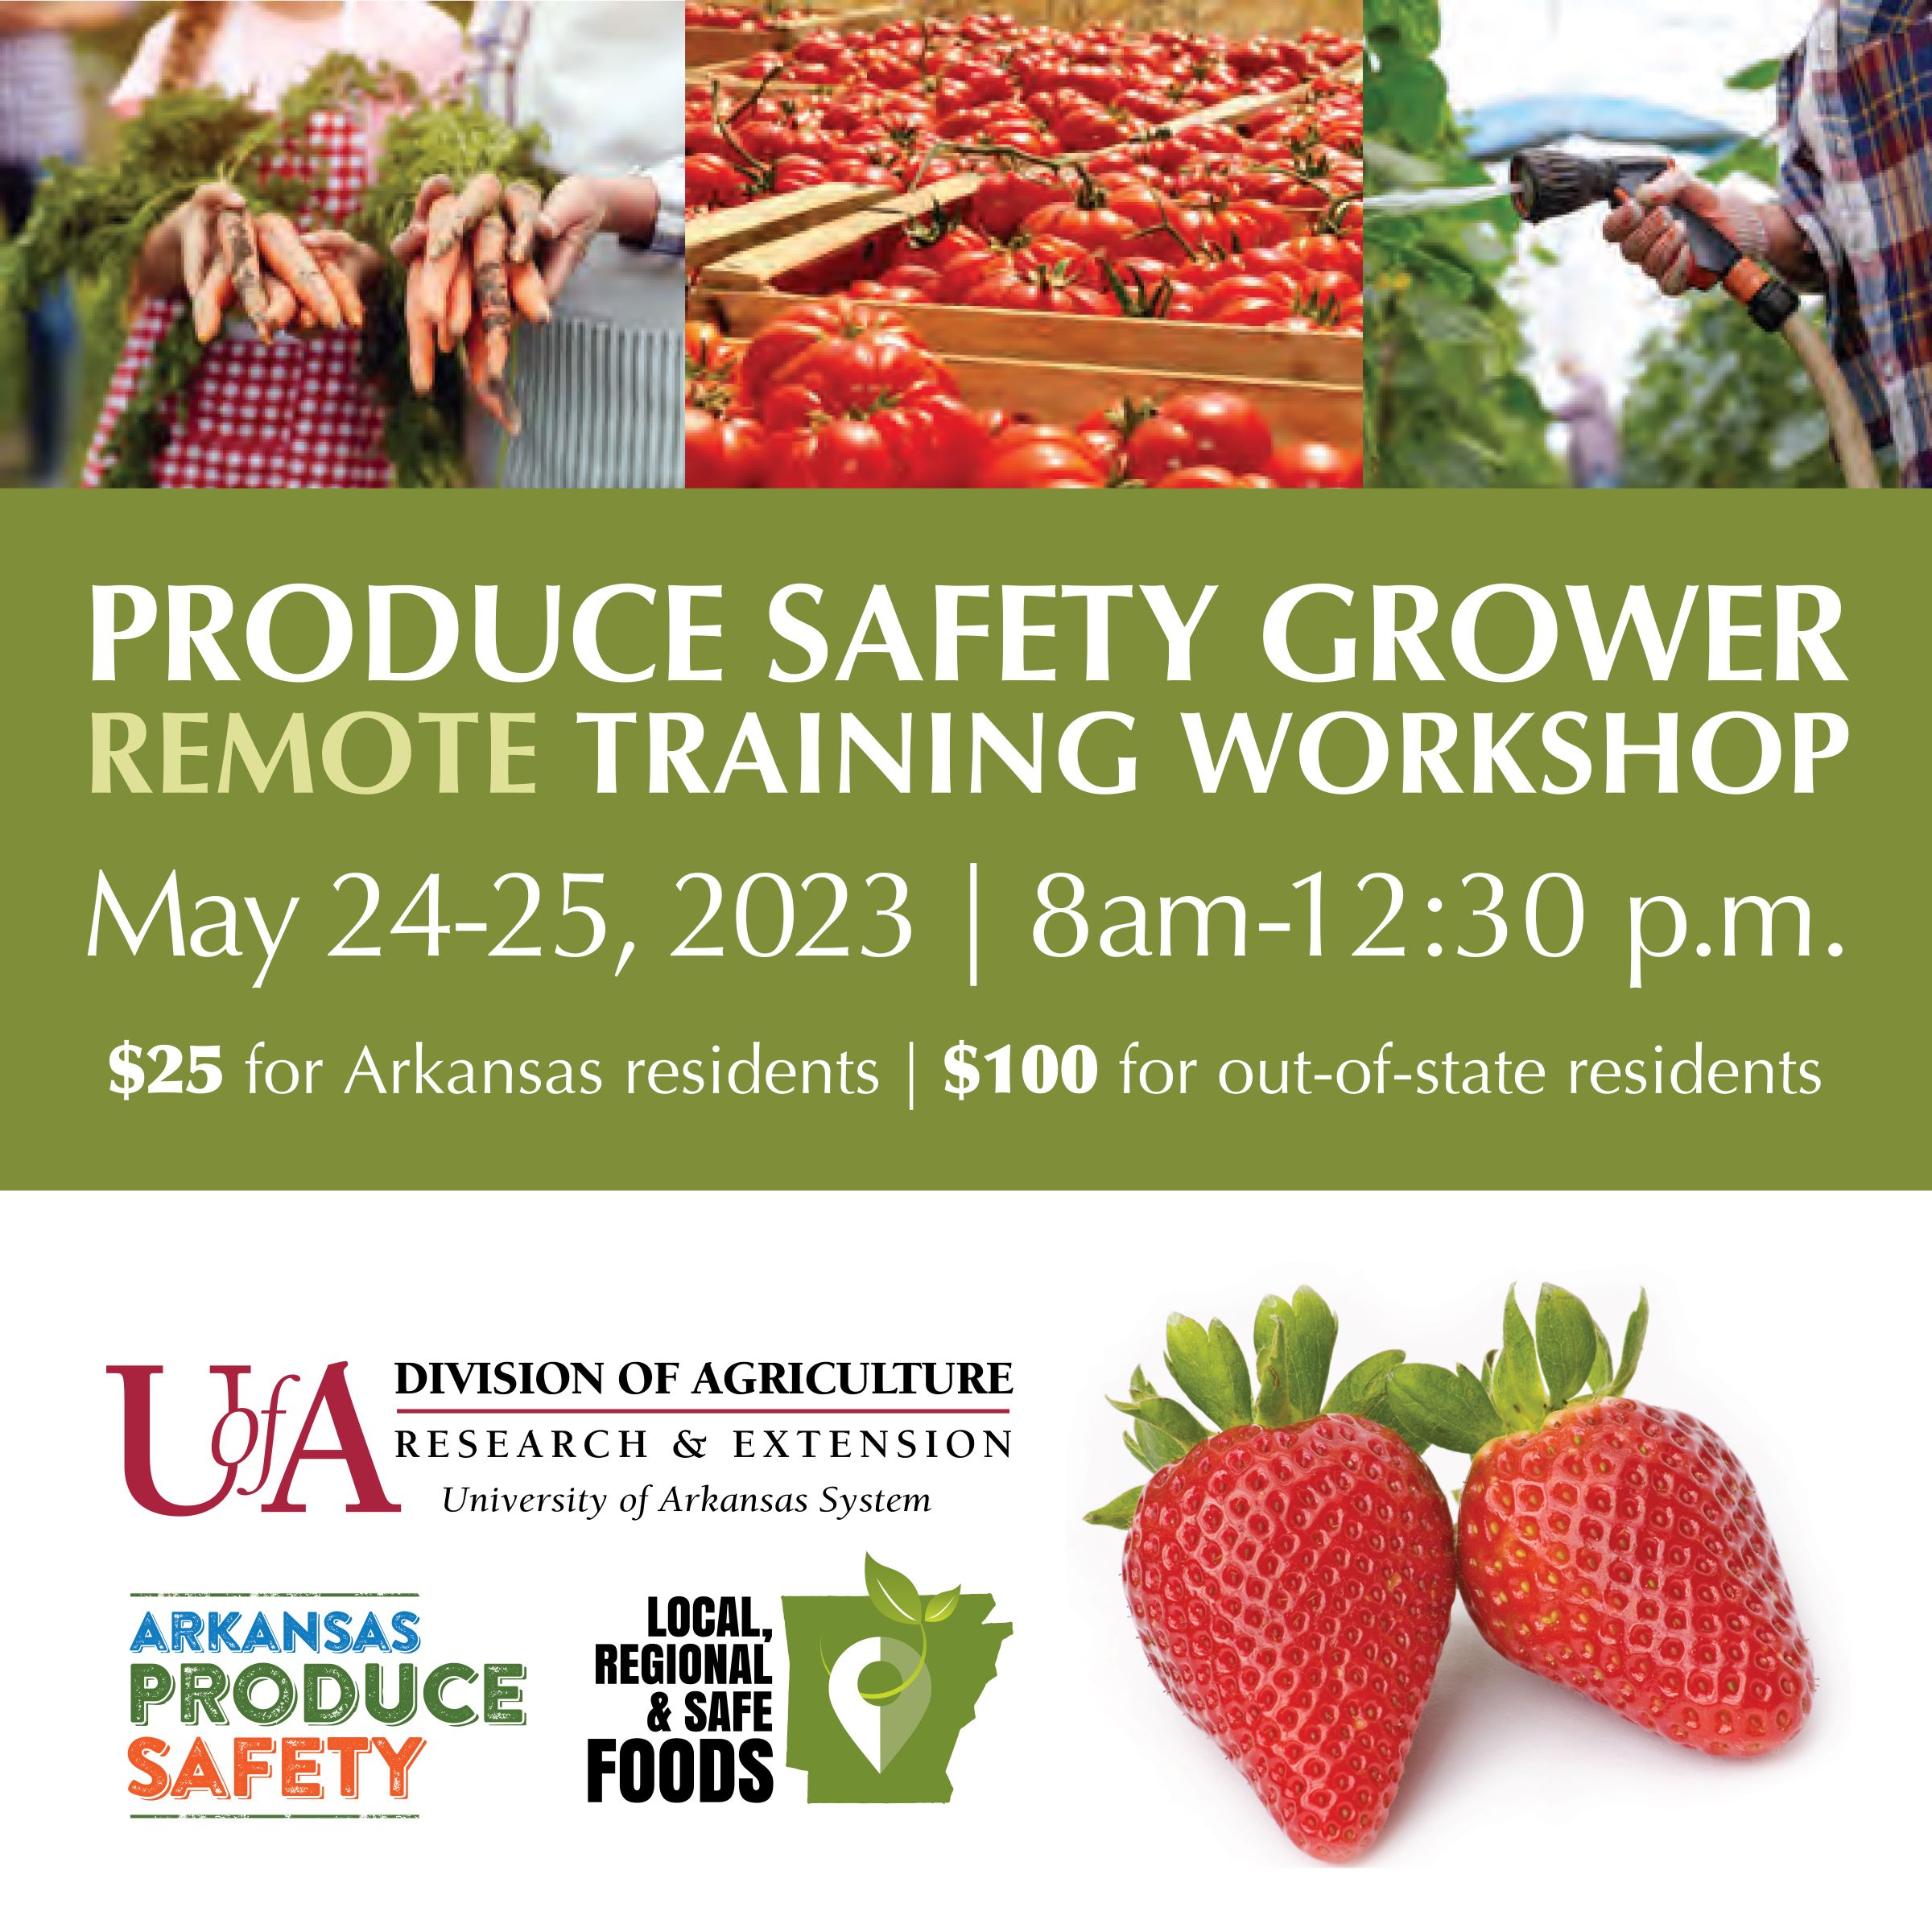 PRODUCE SAFETY GROWER REMOTE TRAINING WORKSHOP. May 24-25, 2023 | 8am-12:30 p.m.. $25 for Arkansas residents | $100 for out-of-state residents